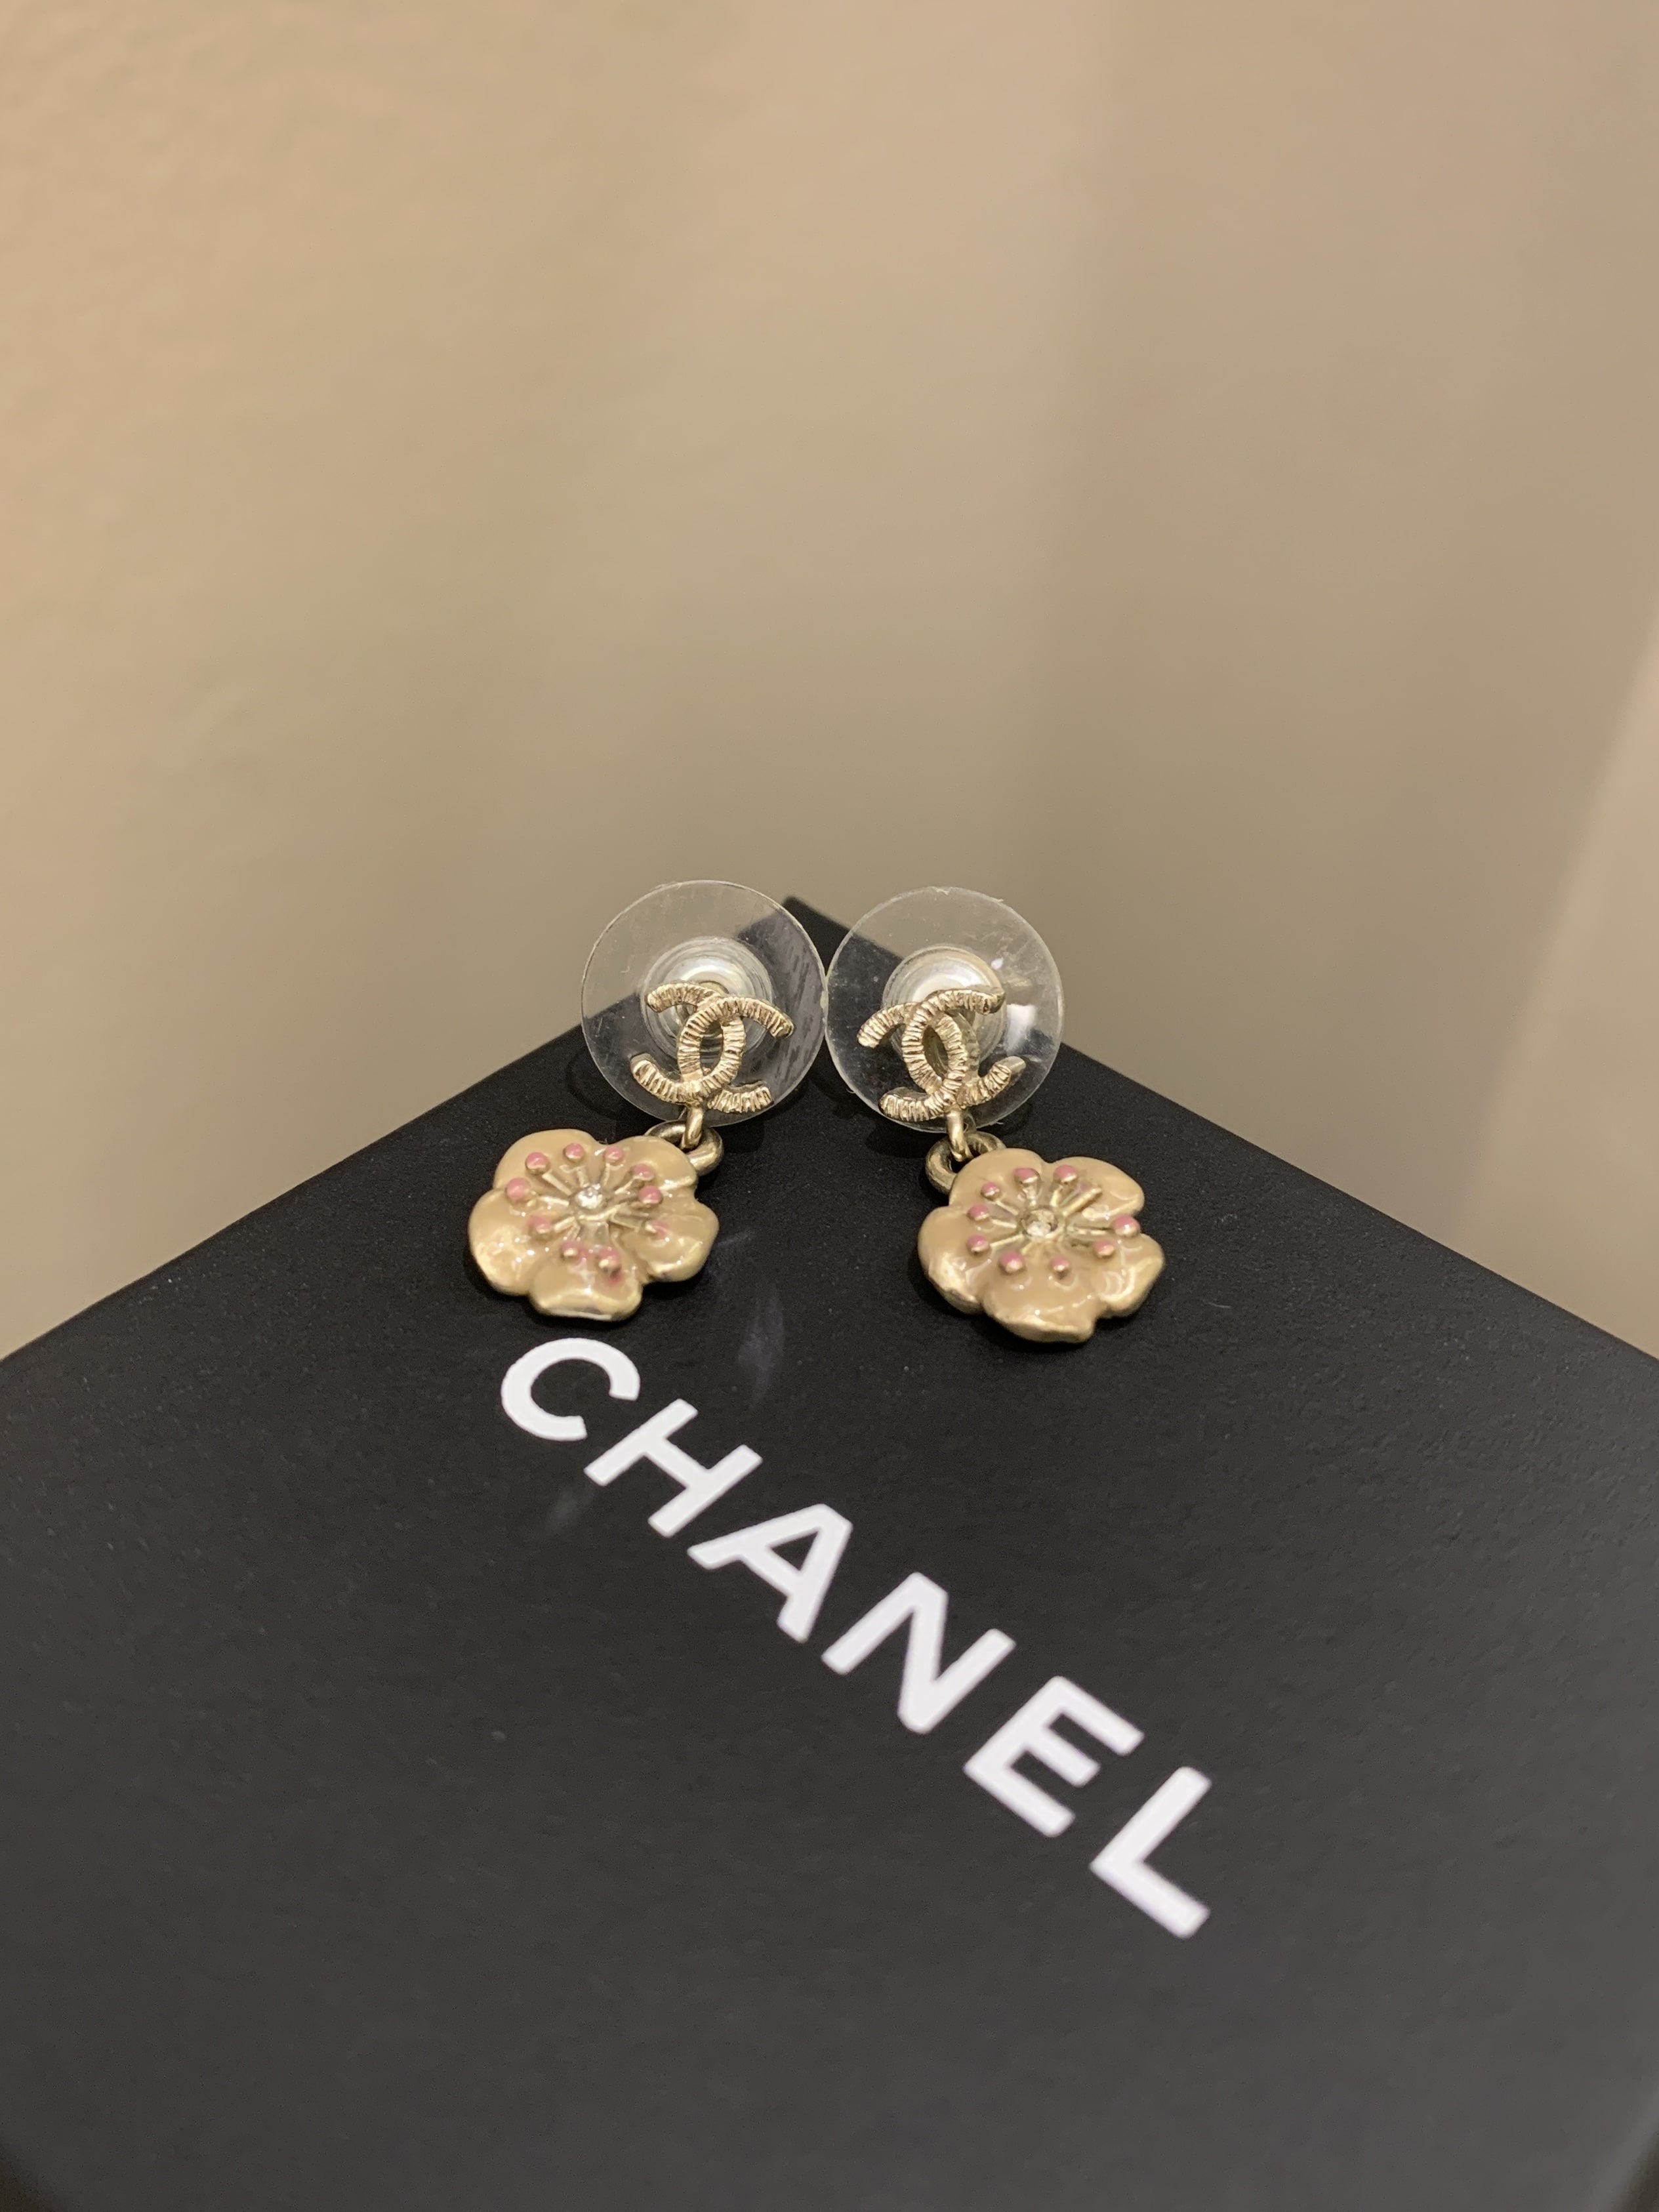 Chanel Z3163 Flower Crystal Earring and Ring